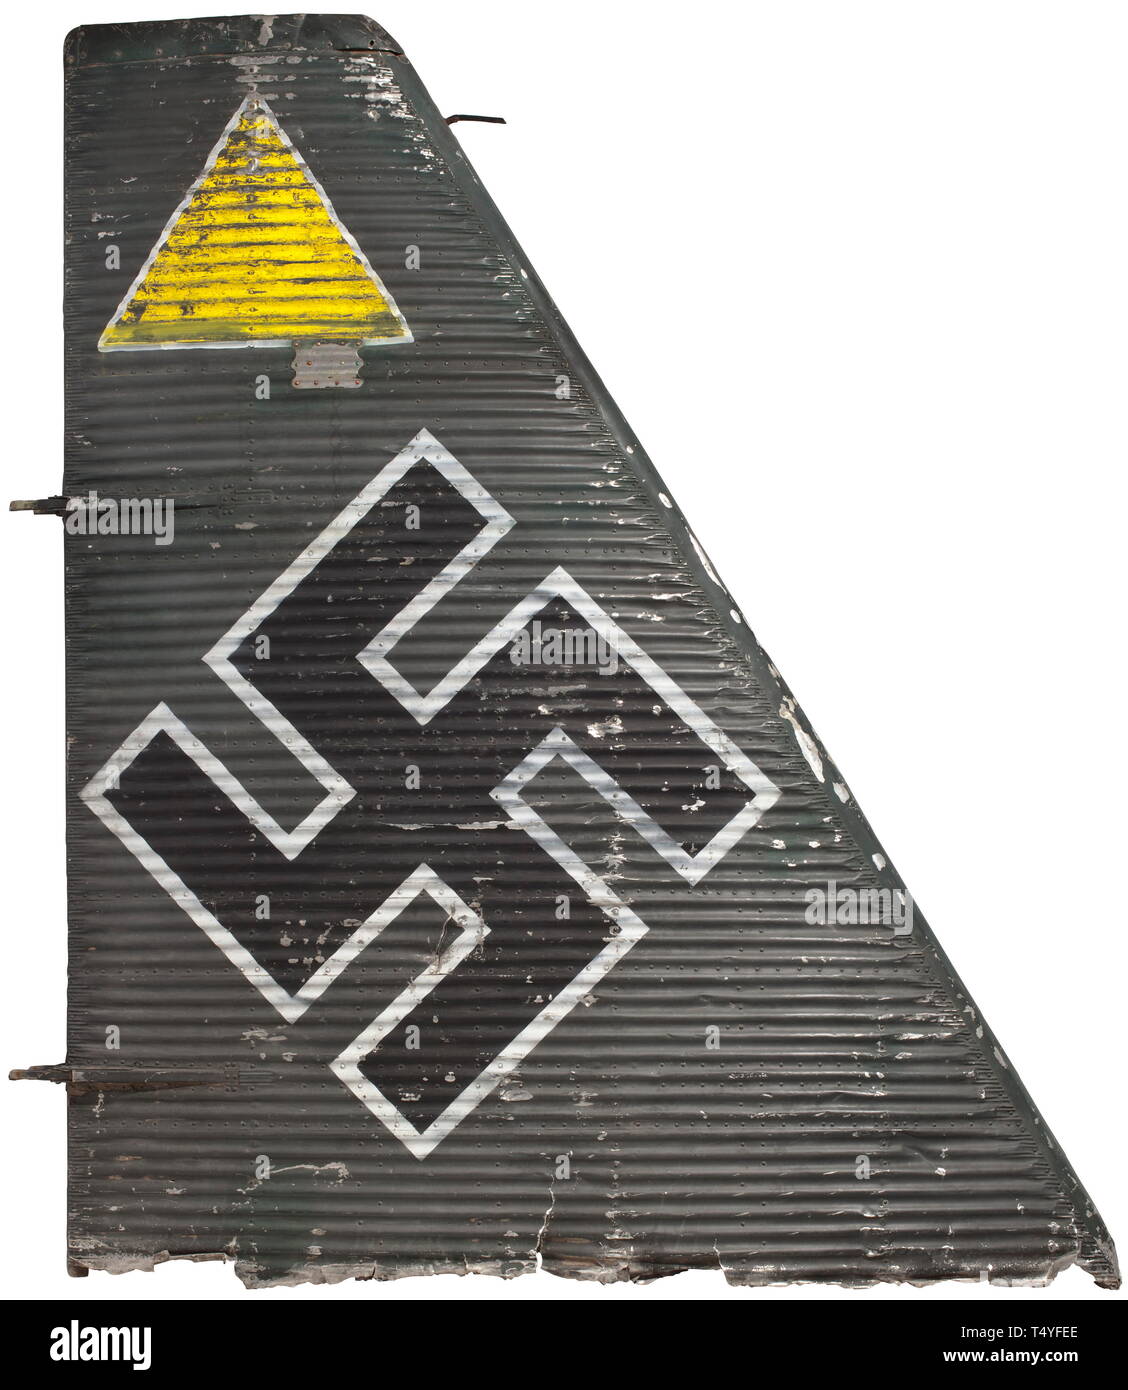 A Junkers JU-52 tail unit with tactical and national symbols. The tail unit of aluminium worked in multiple layers, multi-riveted, labelled and painted in typical Luftwaffe grey. A national emblem at the middle, above which is a tactical symbol for the third aircraft of the squadron. Riveted-on type plate with designation '010 - 1508 - mdq'. Marks of age and damage. Dimensions ca. 180 x 210 x 35 cm, weight ca. 20 kg. In 1944, this aircraft was forced to make an emergency landing in the vicinity of Salzburg, and its components were used by the civilian population after the d, Editorial-Use-Only Stock Photo